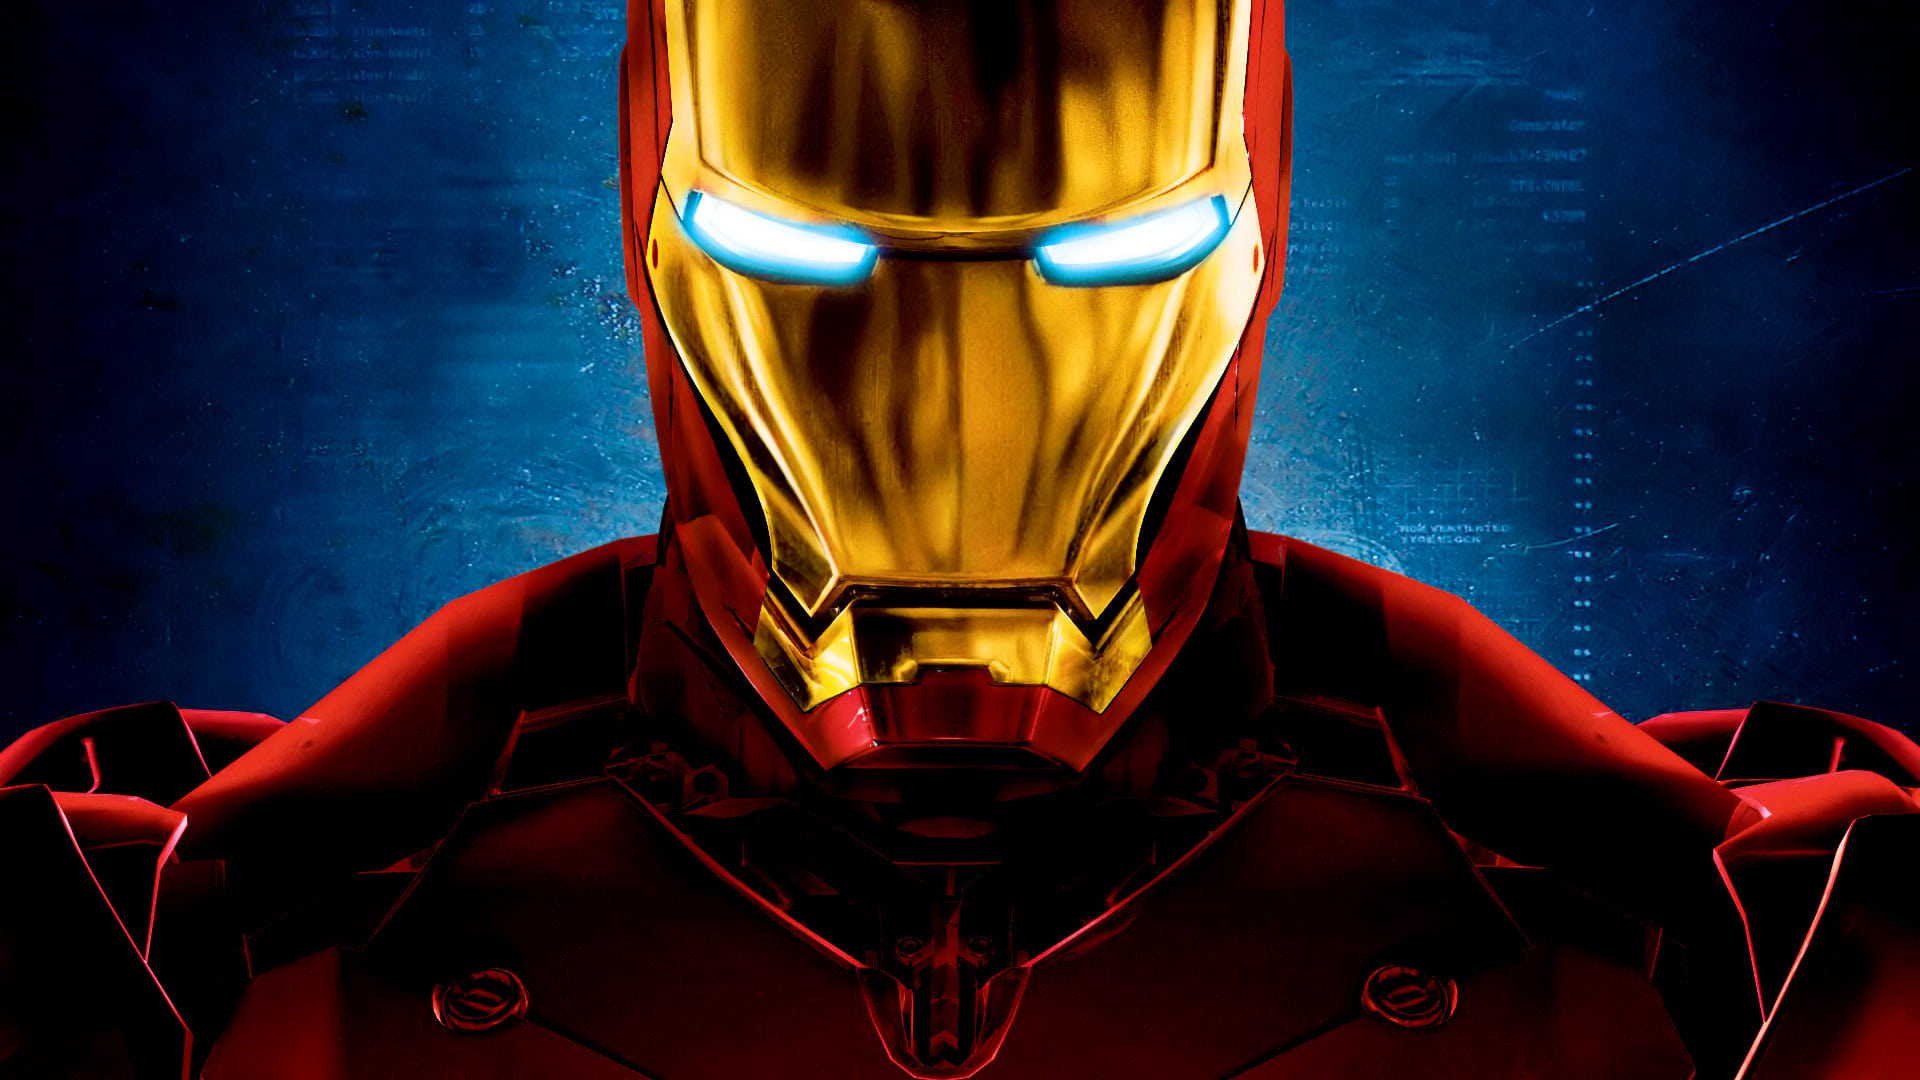 Iron Man Soundtrack Music - Complete Song List | Tunefind